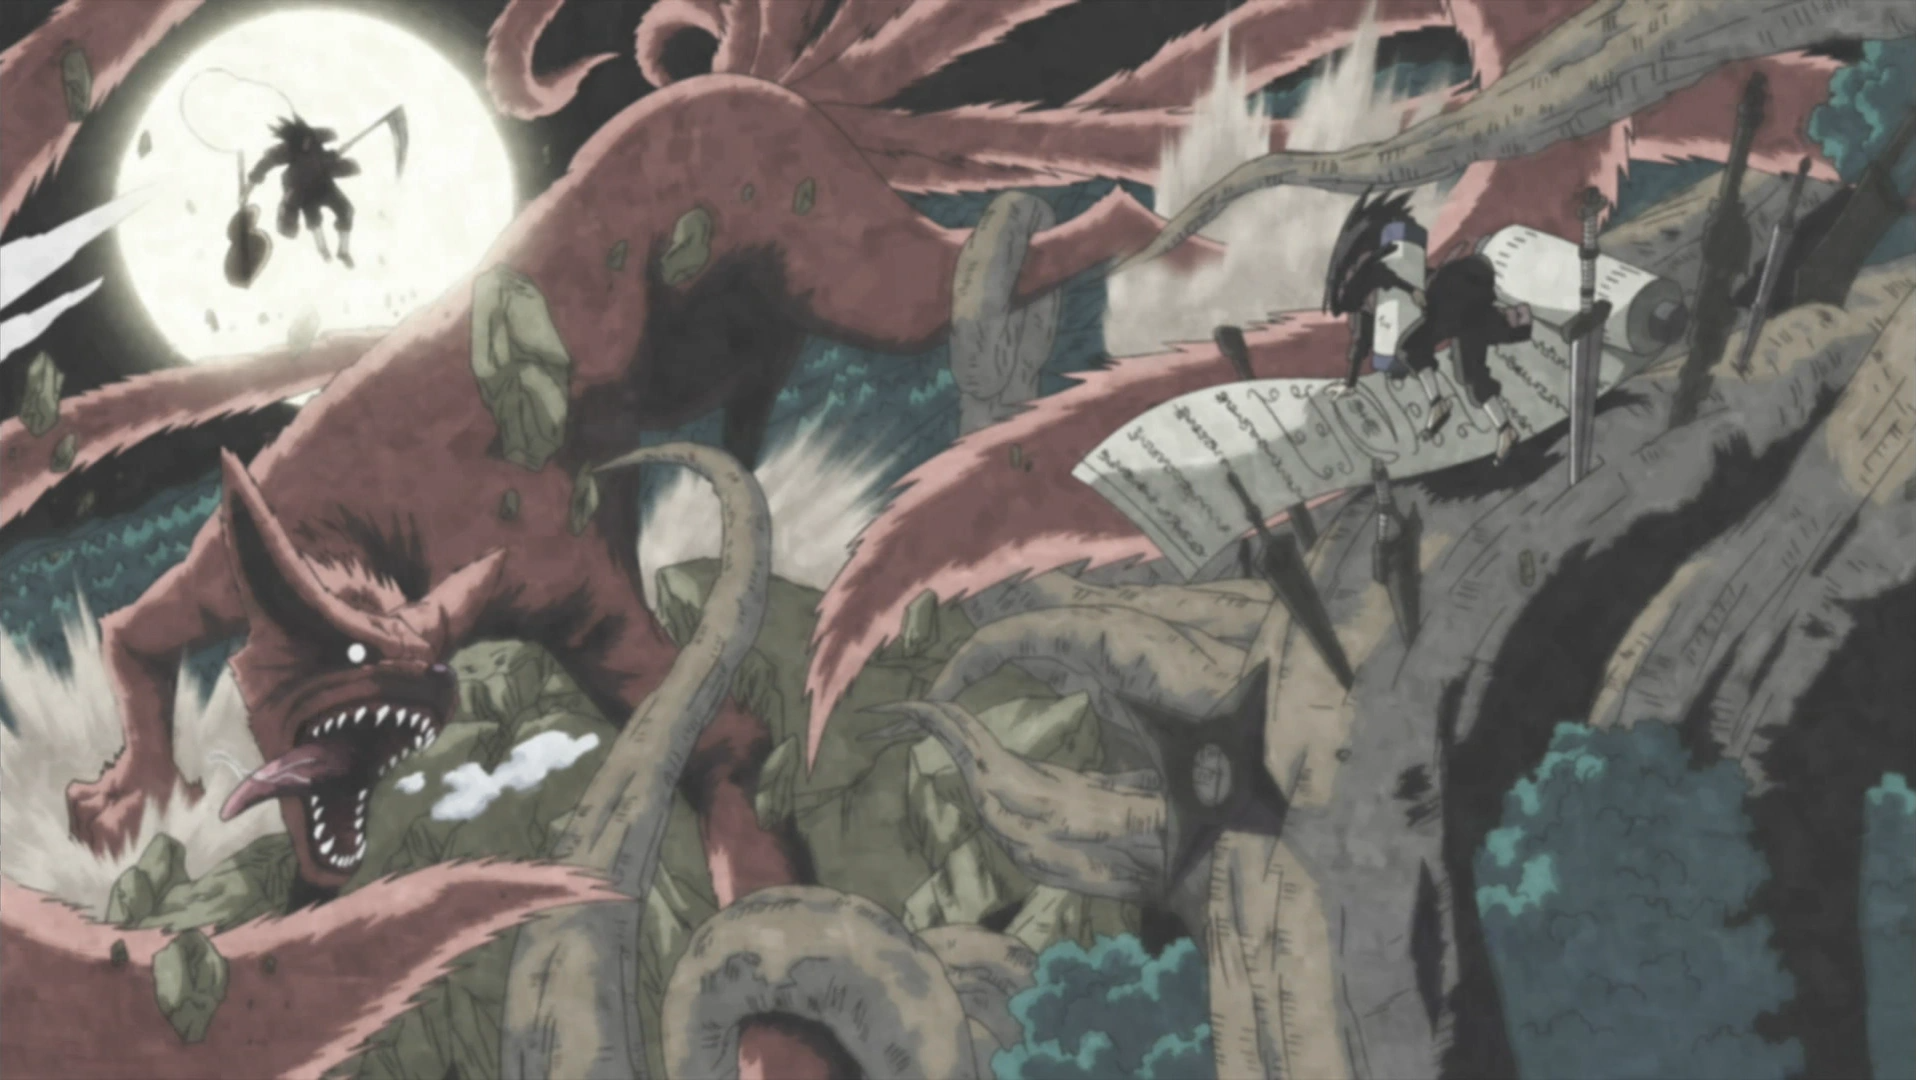 How was Hashirama in the reaper death seal in Naruto?